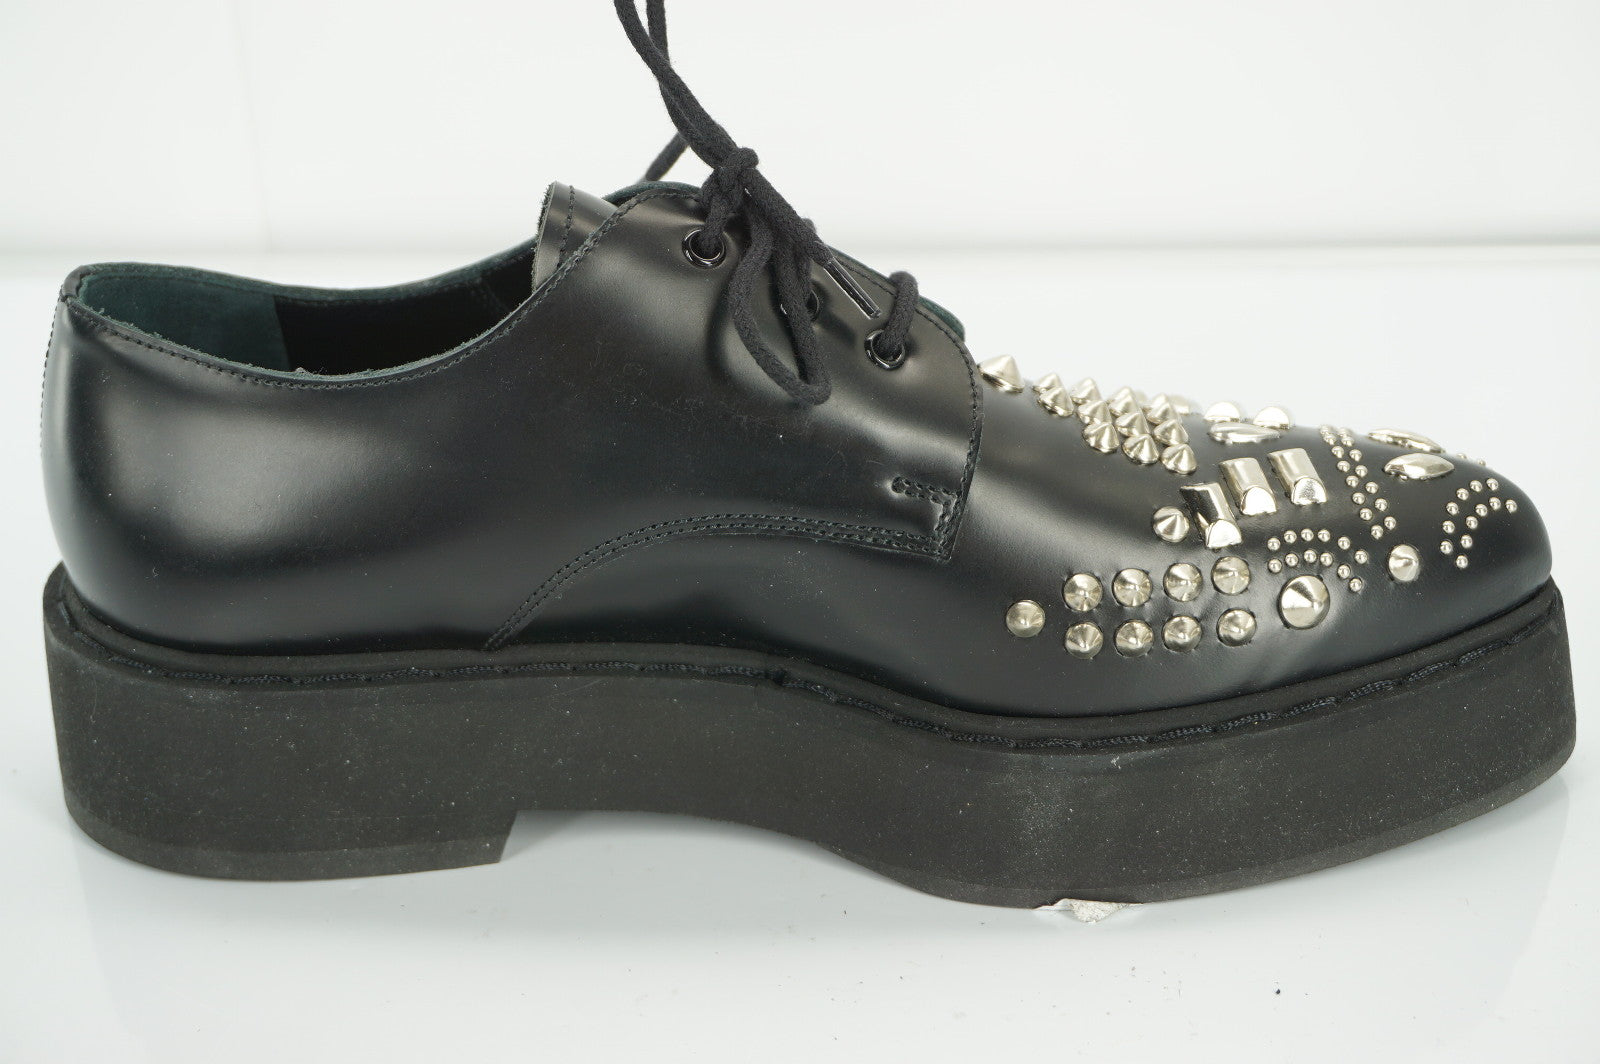 Alexander McQueen McQ Black Leather Studded Toe Women's Shoes Size 39 NIB $835